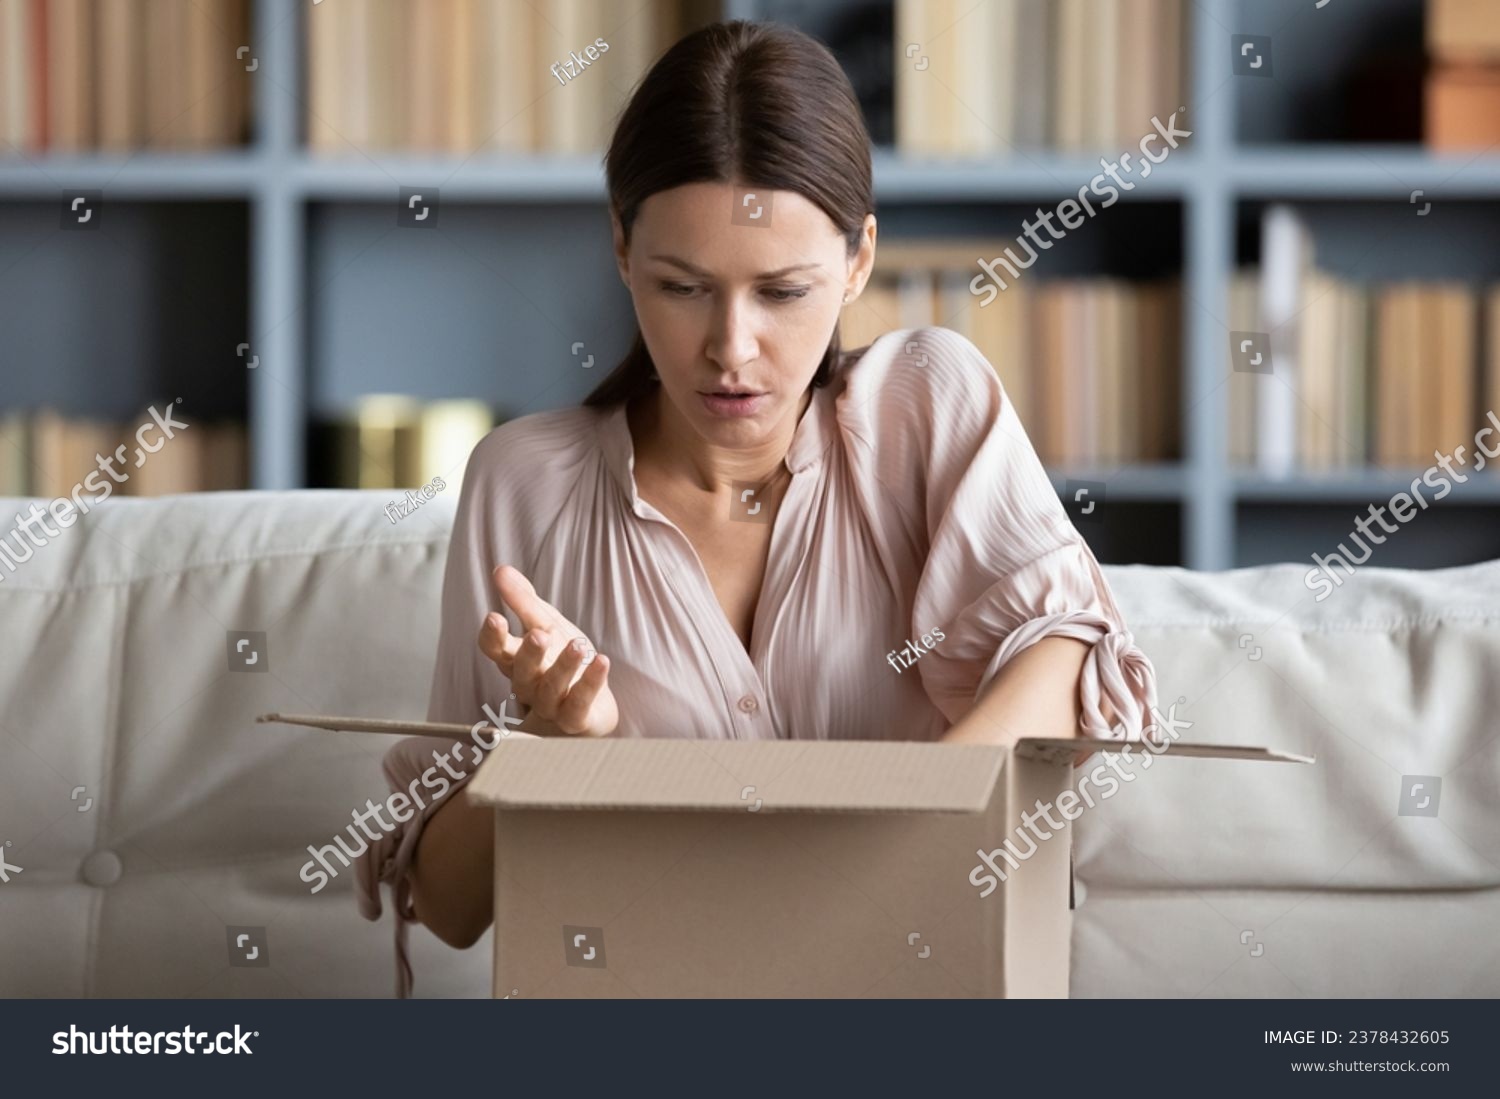 Woman sitting on couch put on lap carton box opened it feels disillusioned parcel arrives damaged broken or mixed up goods, negative feedback, wrong order, bad product quality, return refund concept #2378432605